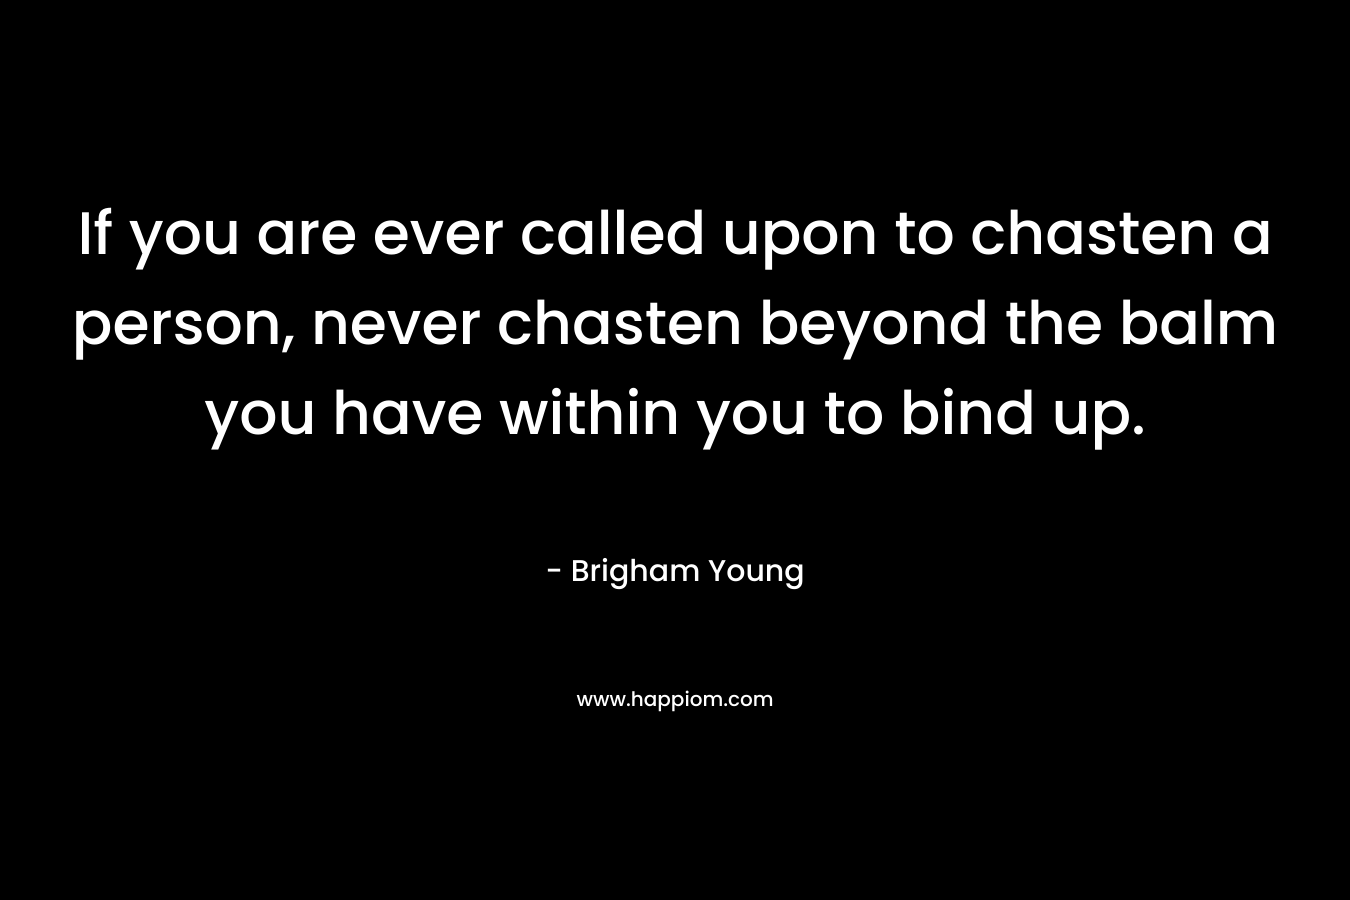 If you are ever called upon to chasten a person, never chasten beyond the balm you have within you to bind up.